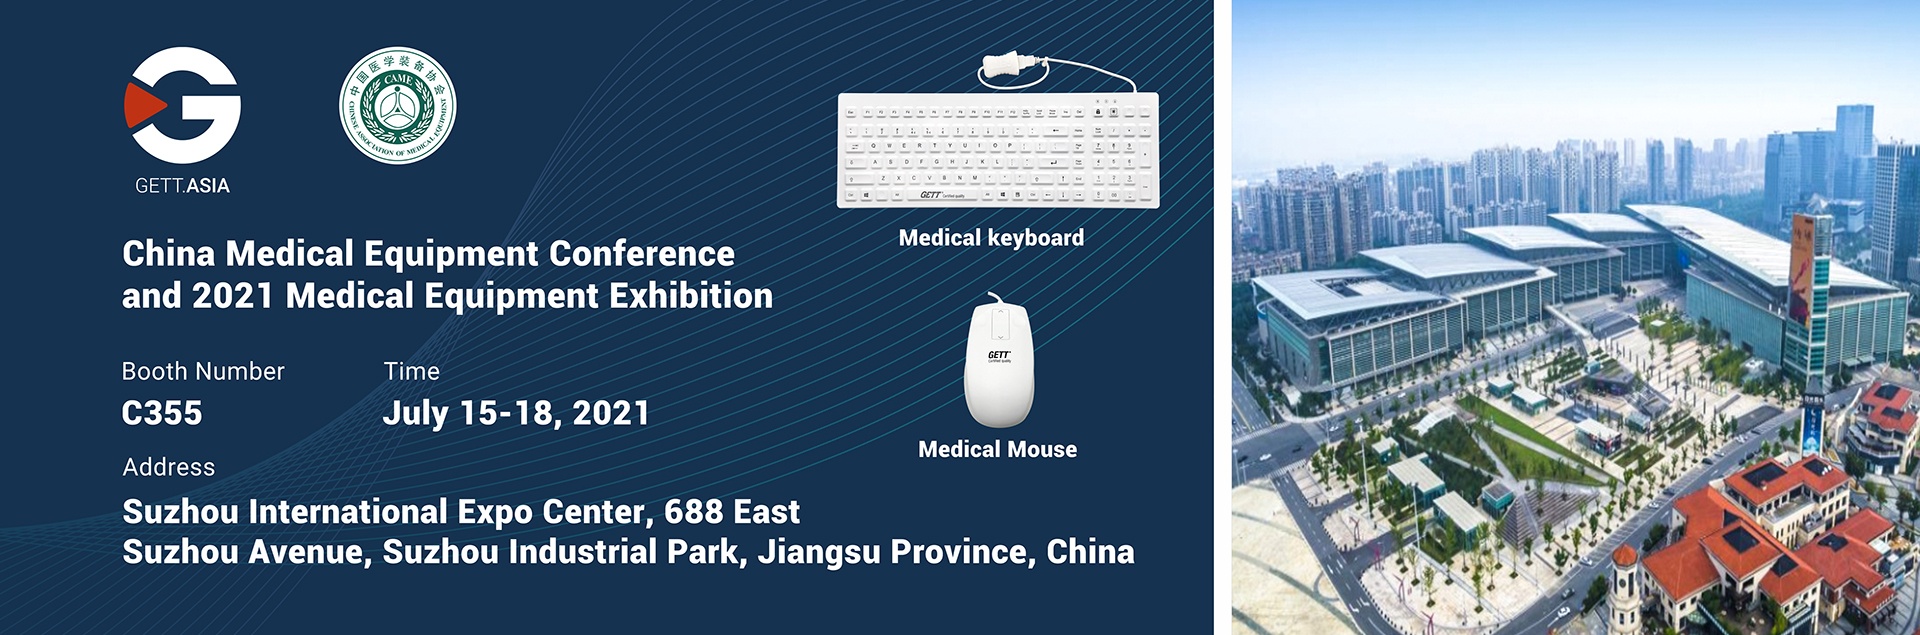 China Medical Equipment Conference and 2021 Medical Equipment Exhibition